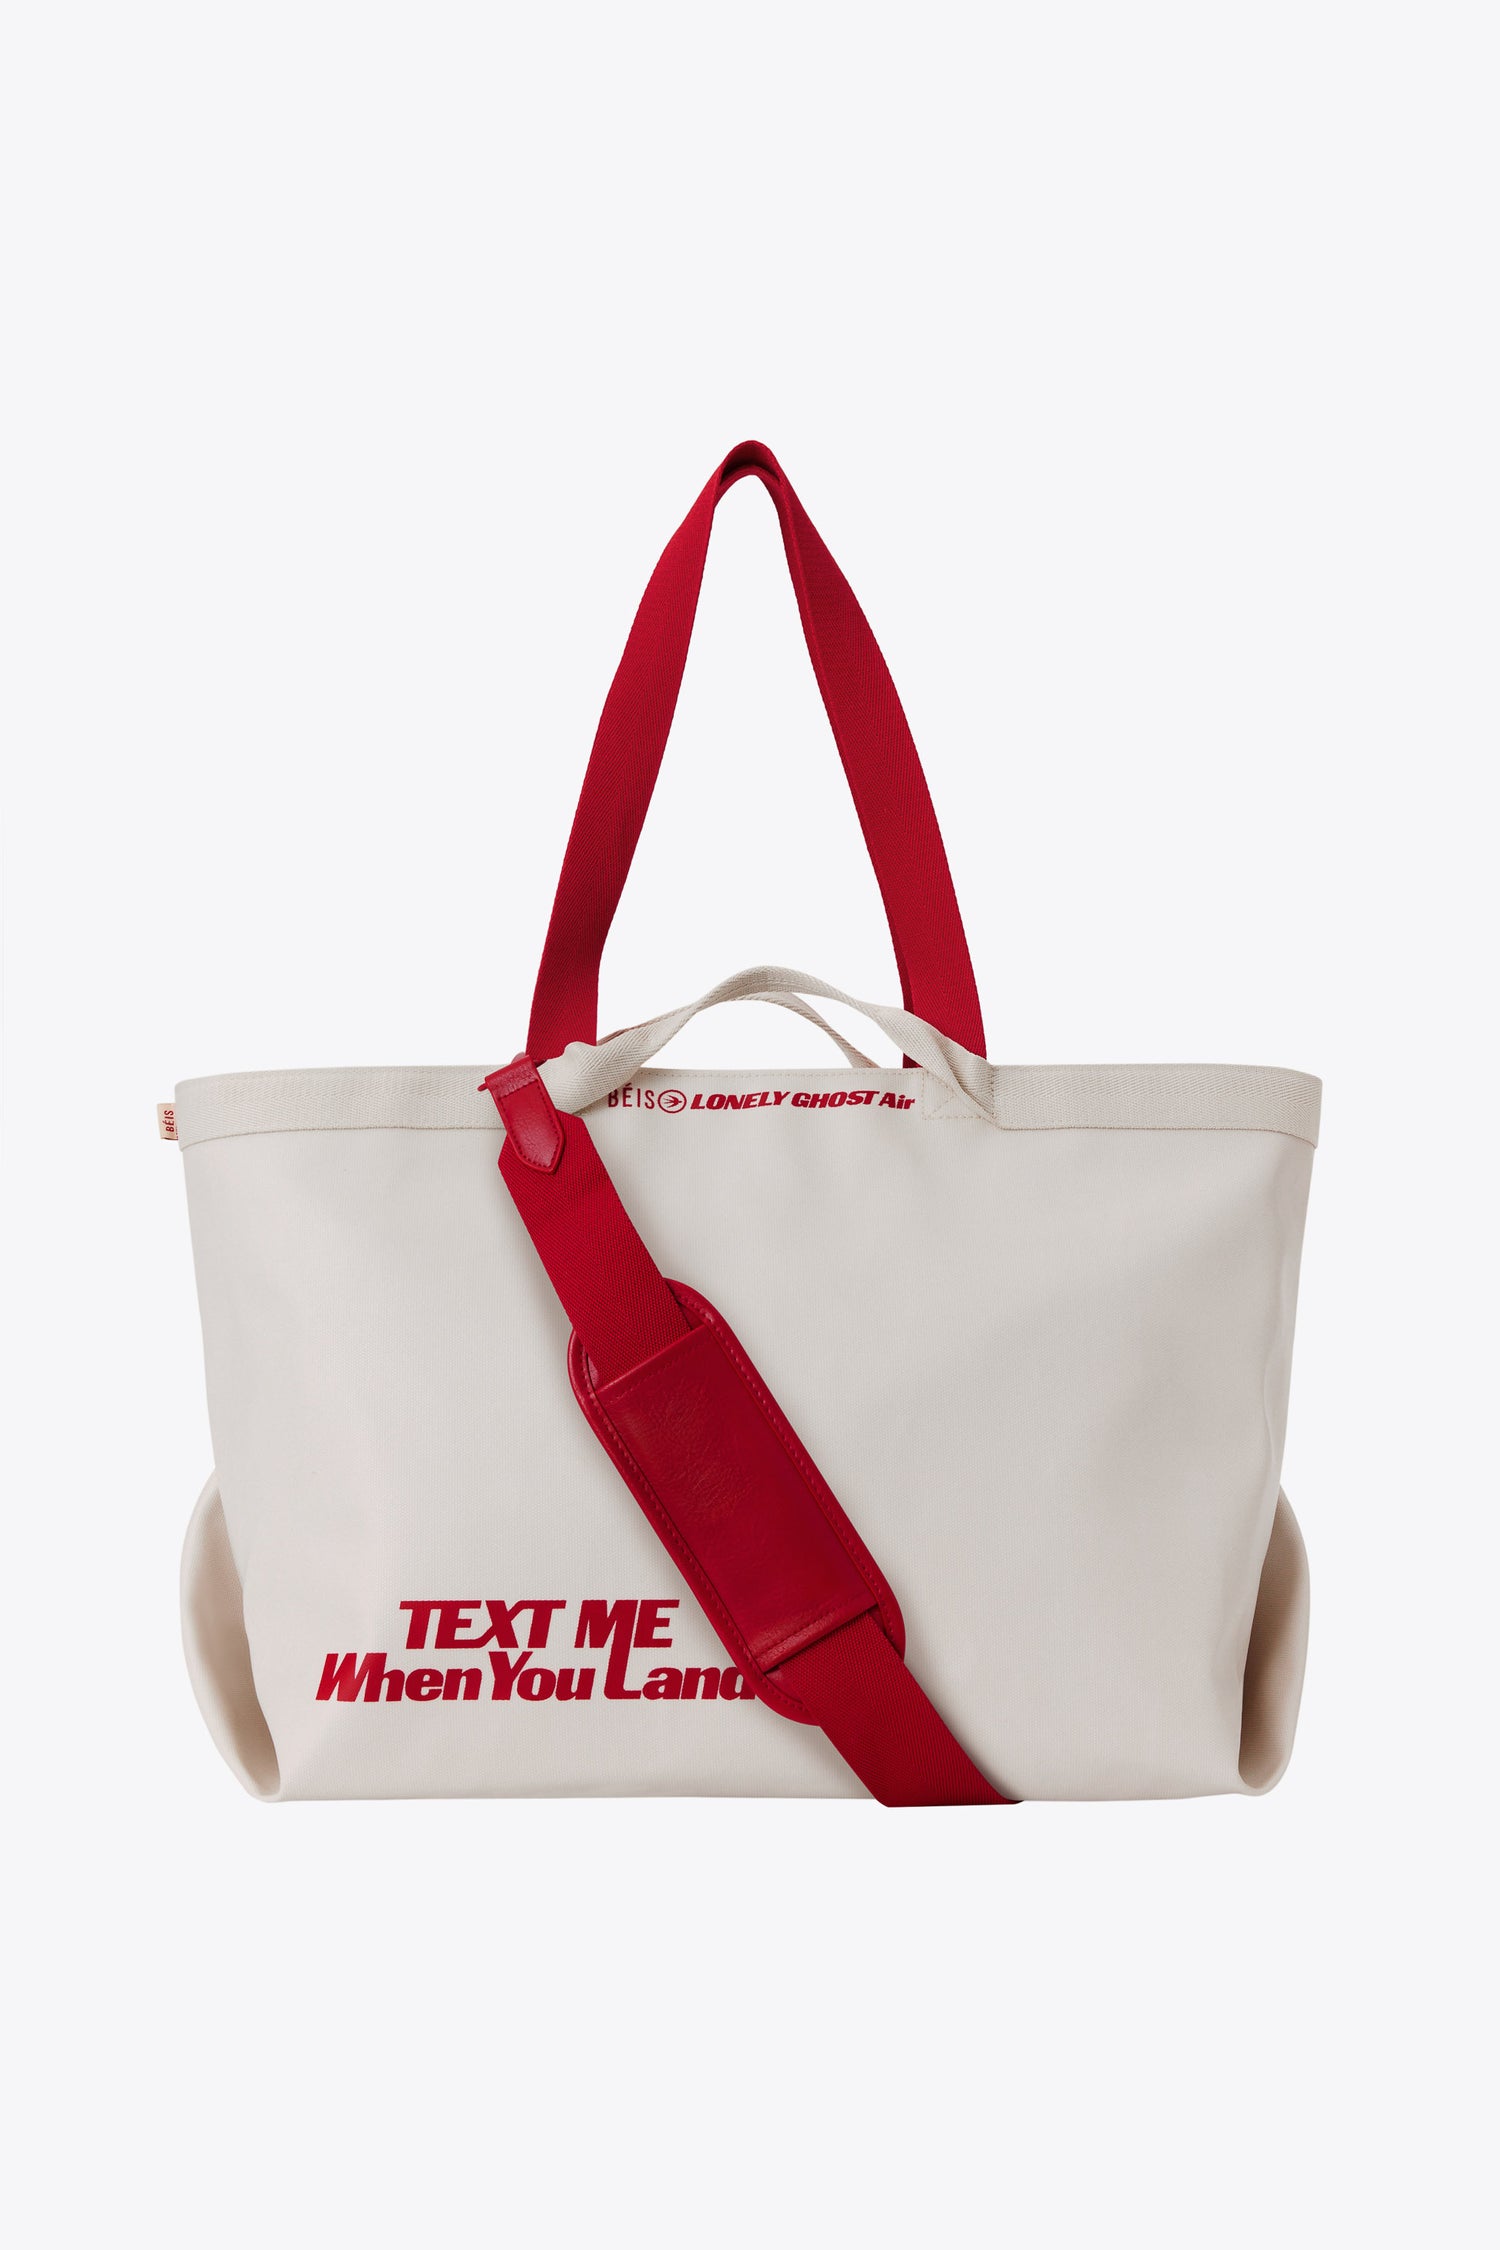 The Travel Tote Colors